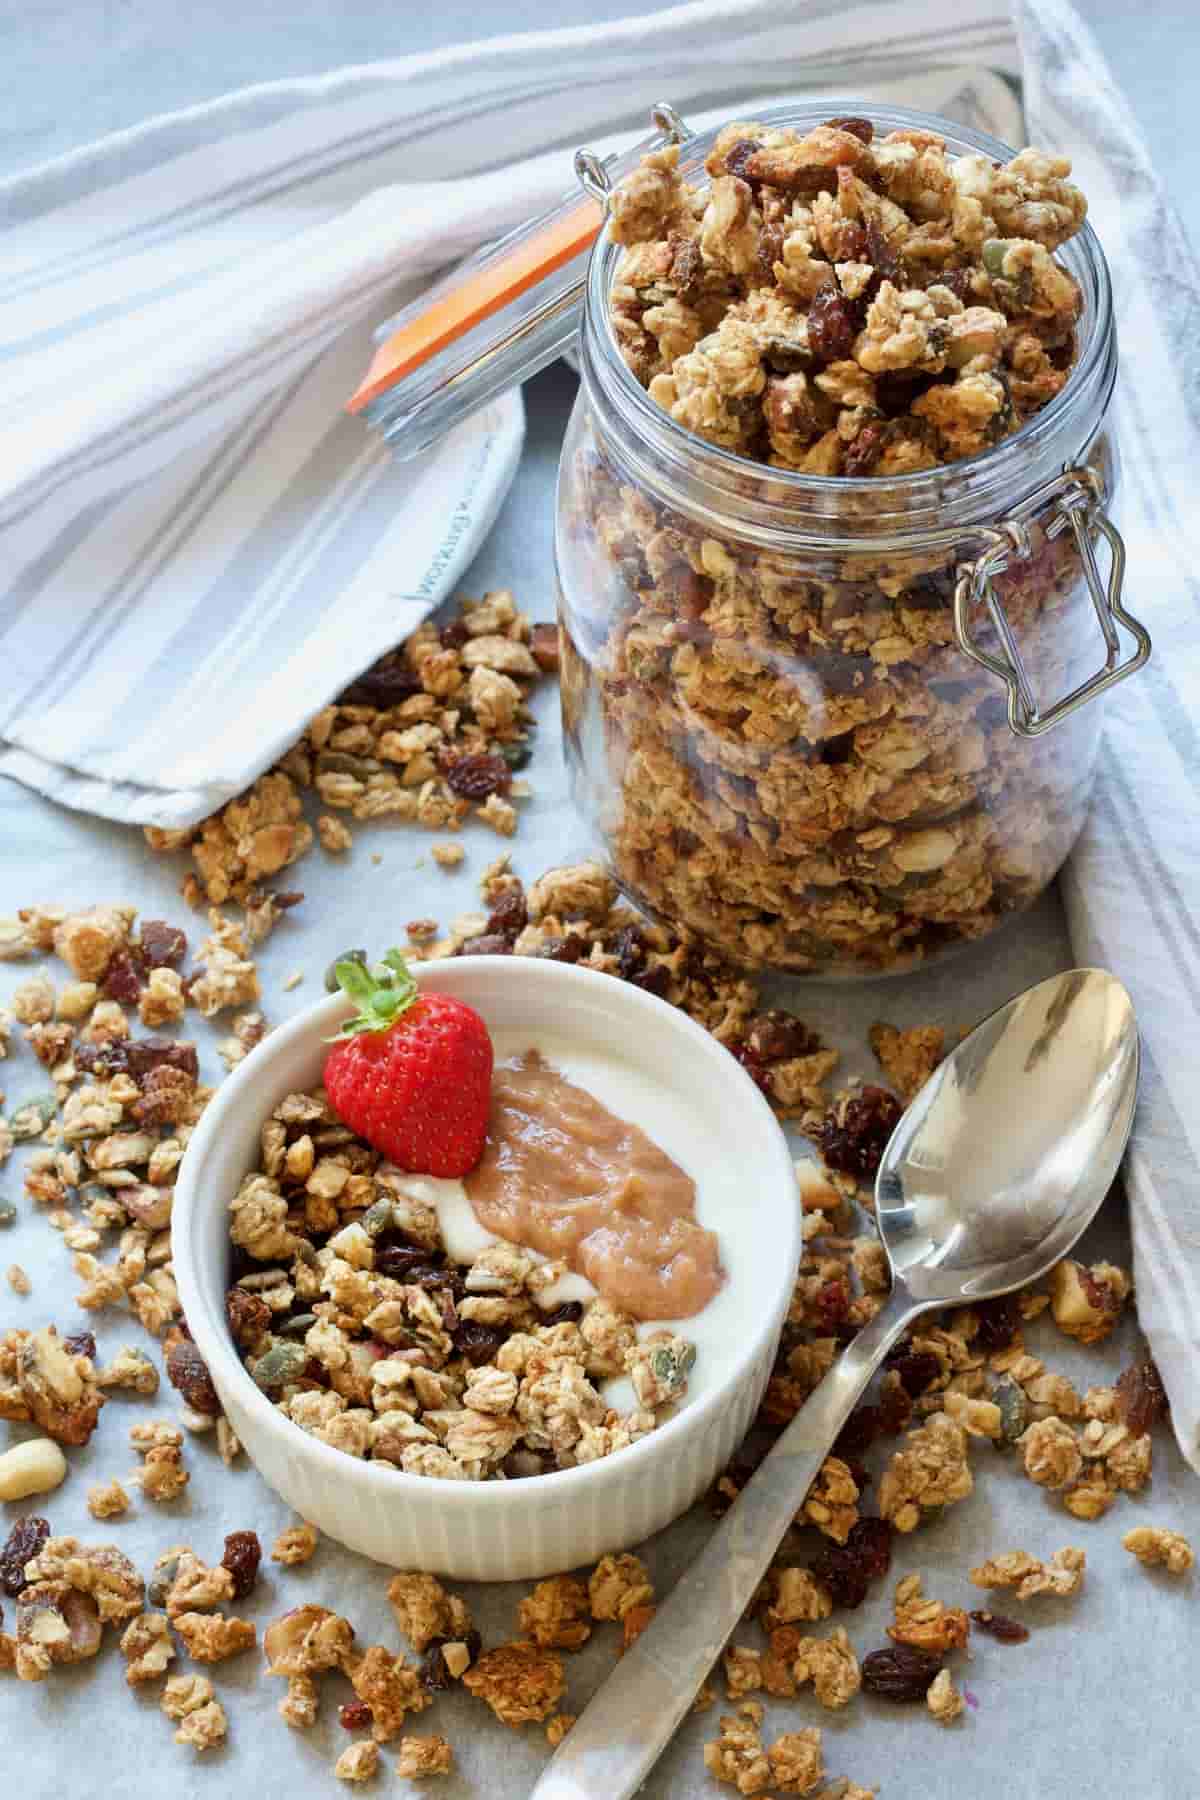 Jar with homemade granola and served portion in a bowl.